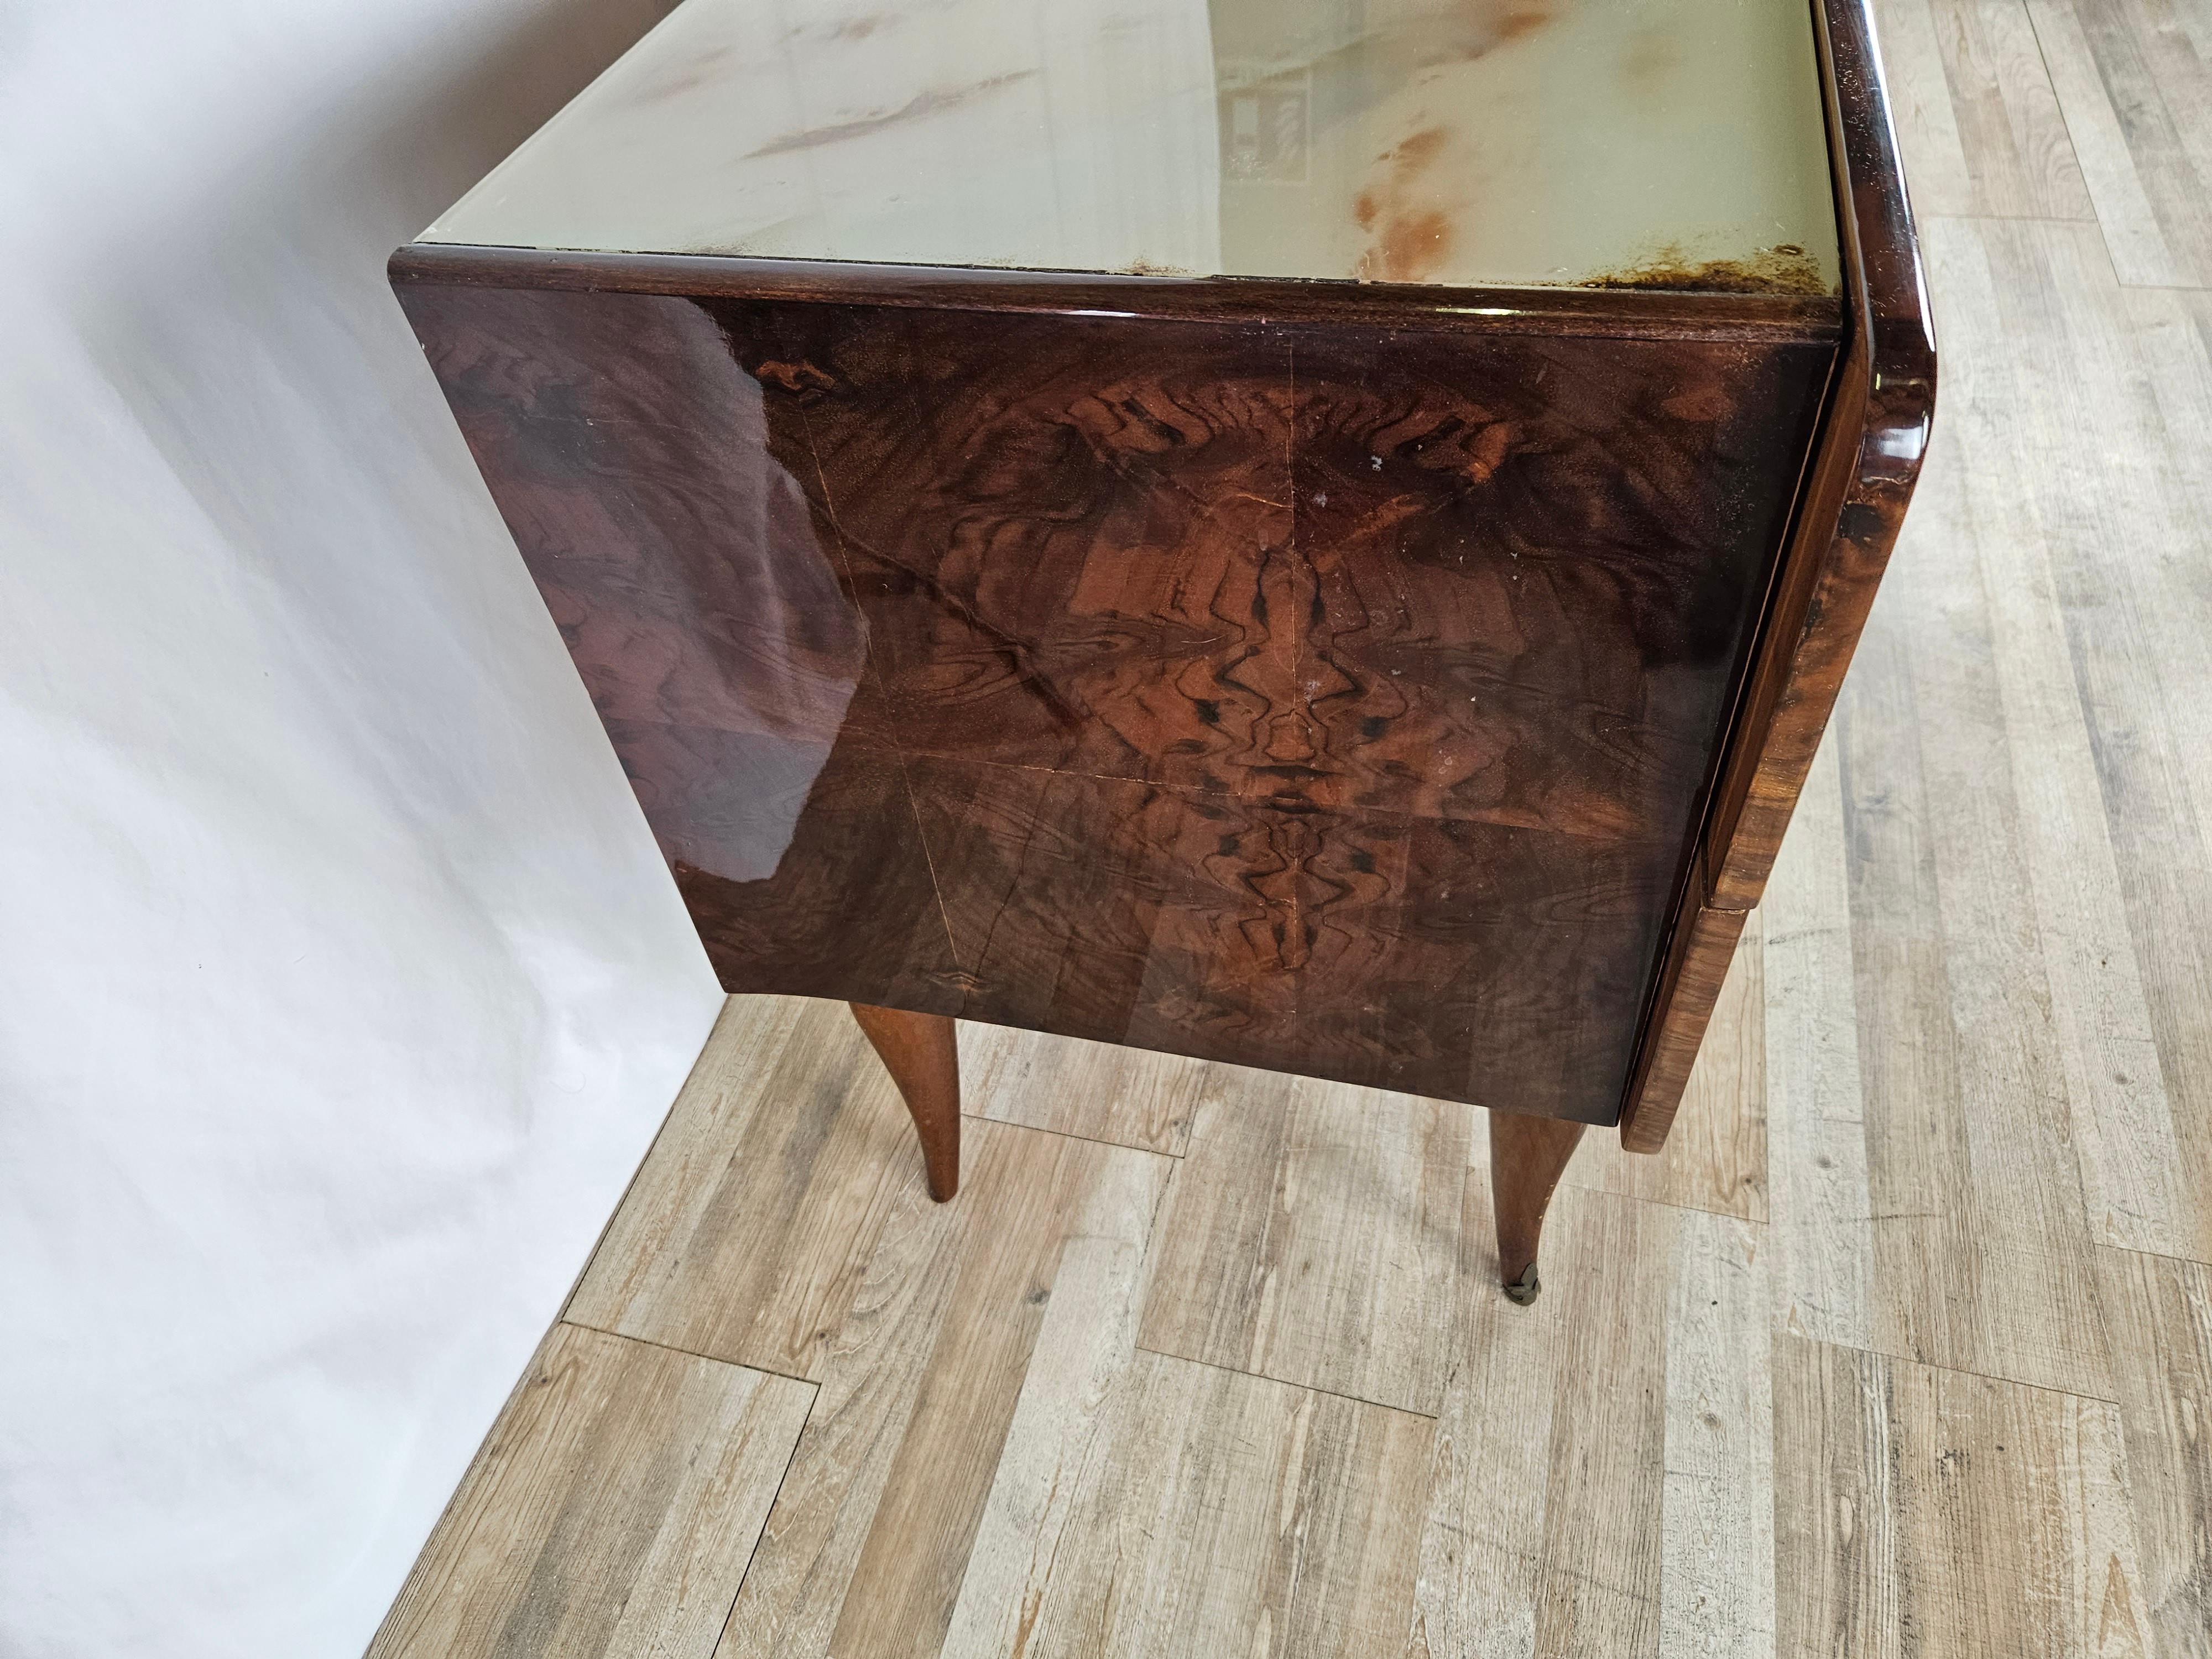 Italian chest of drawers from the early 1950s with a beautiful marbled-effect glass top and a very distinctive design with curved legs.

It features four large and sturdy drawers with original brass handles of the period, a polished and timeless